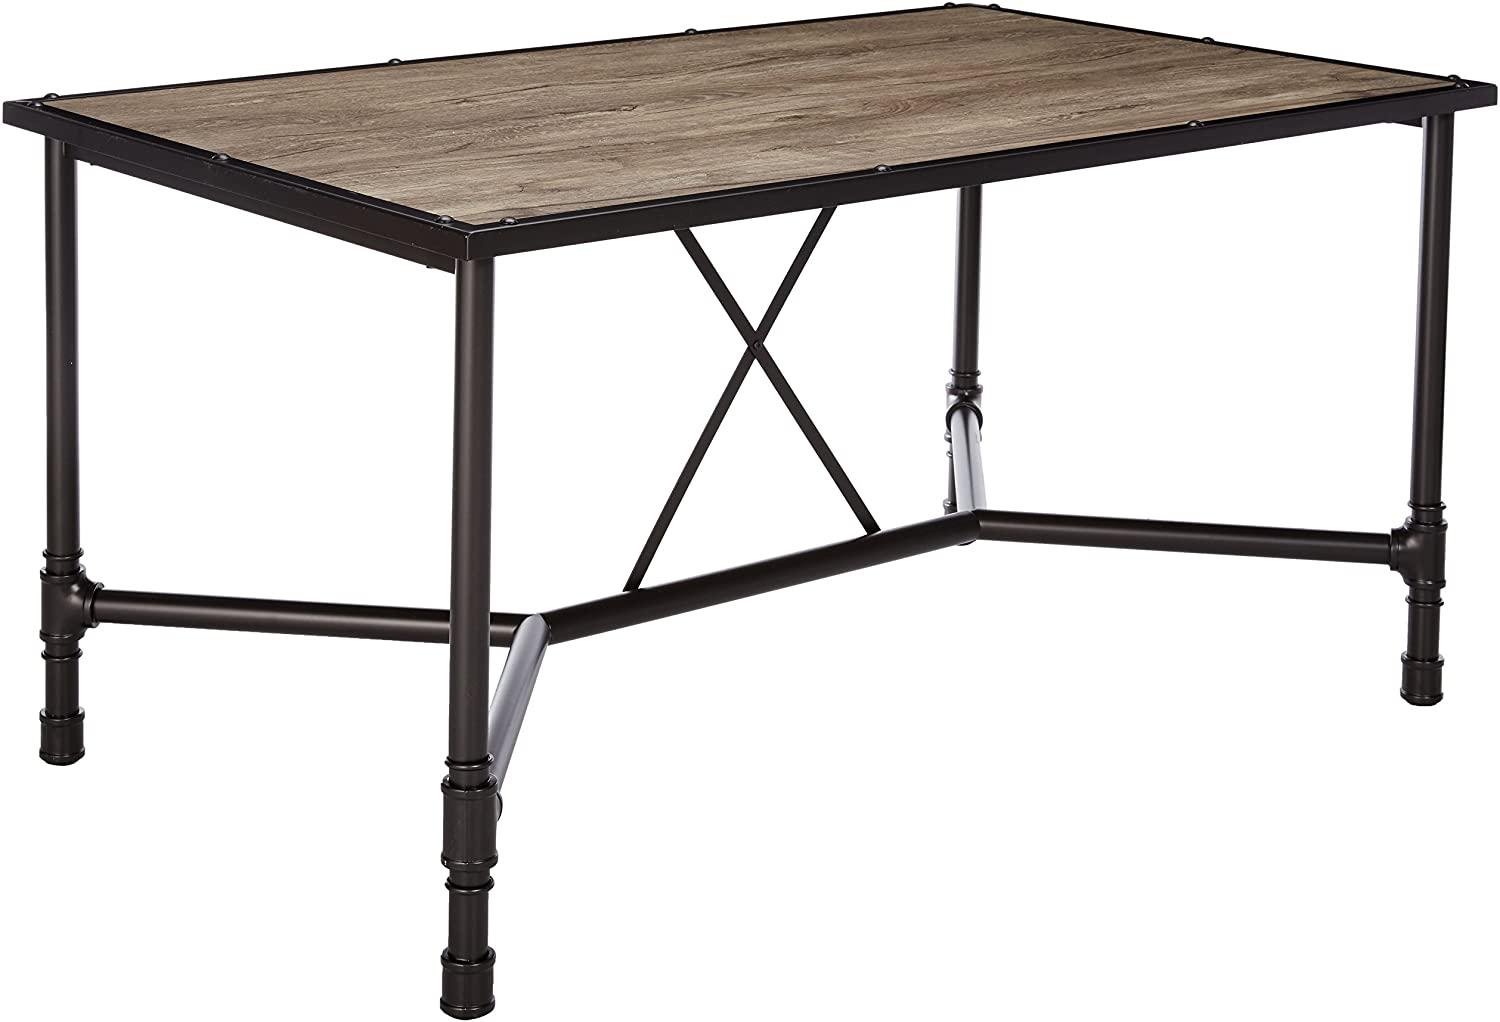 Acme Furniture Caitlin Dining Table